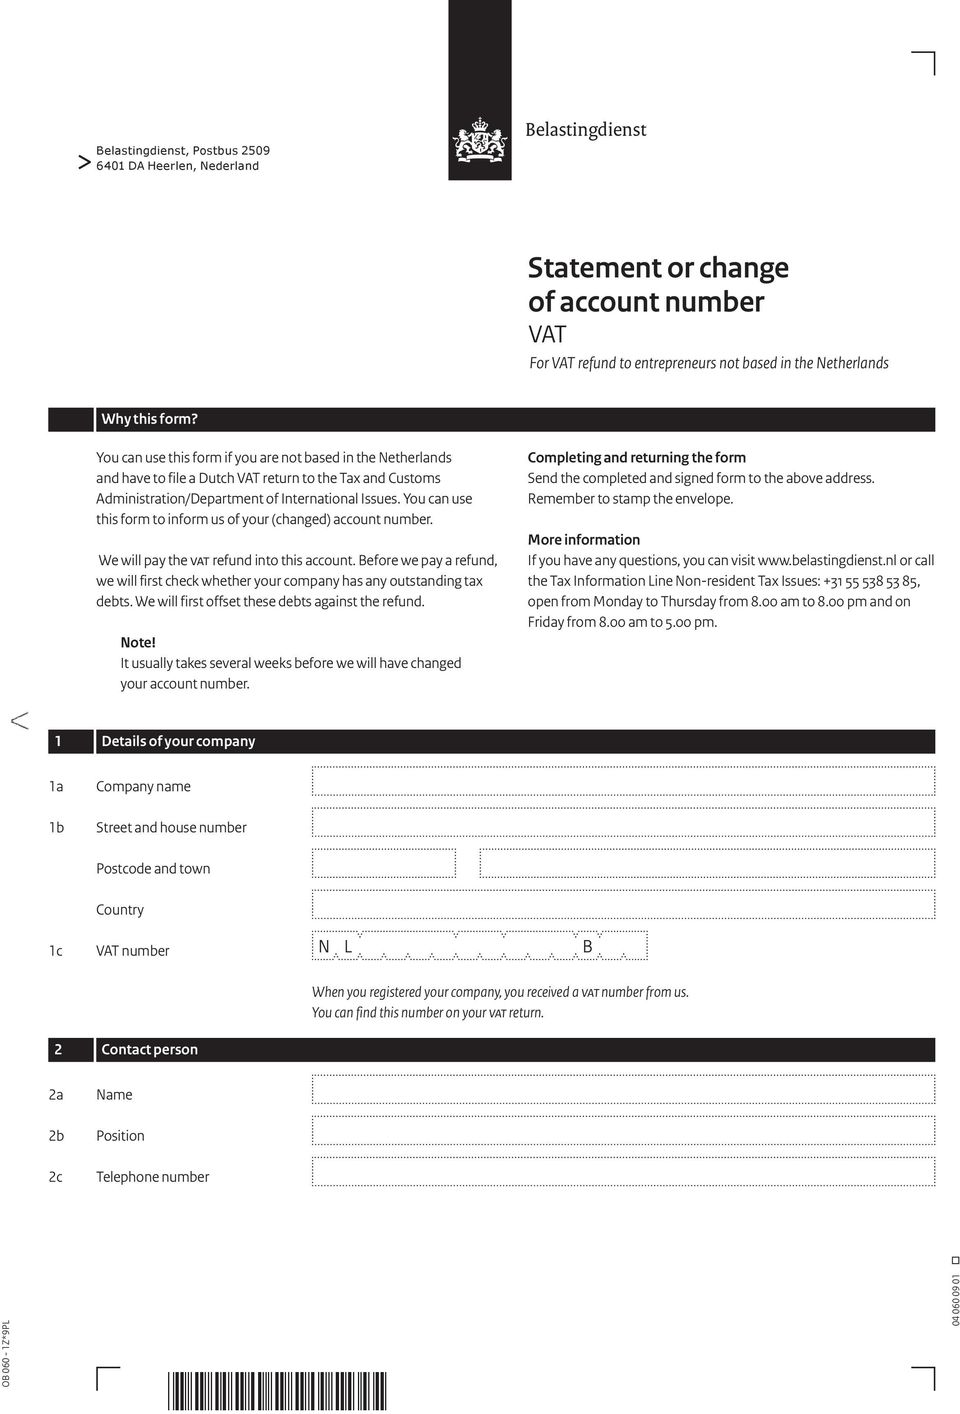 You can use this form to inform us of your (changed) account number. We will pay the vat refund into this account.